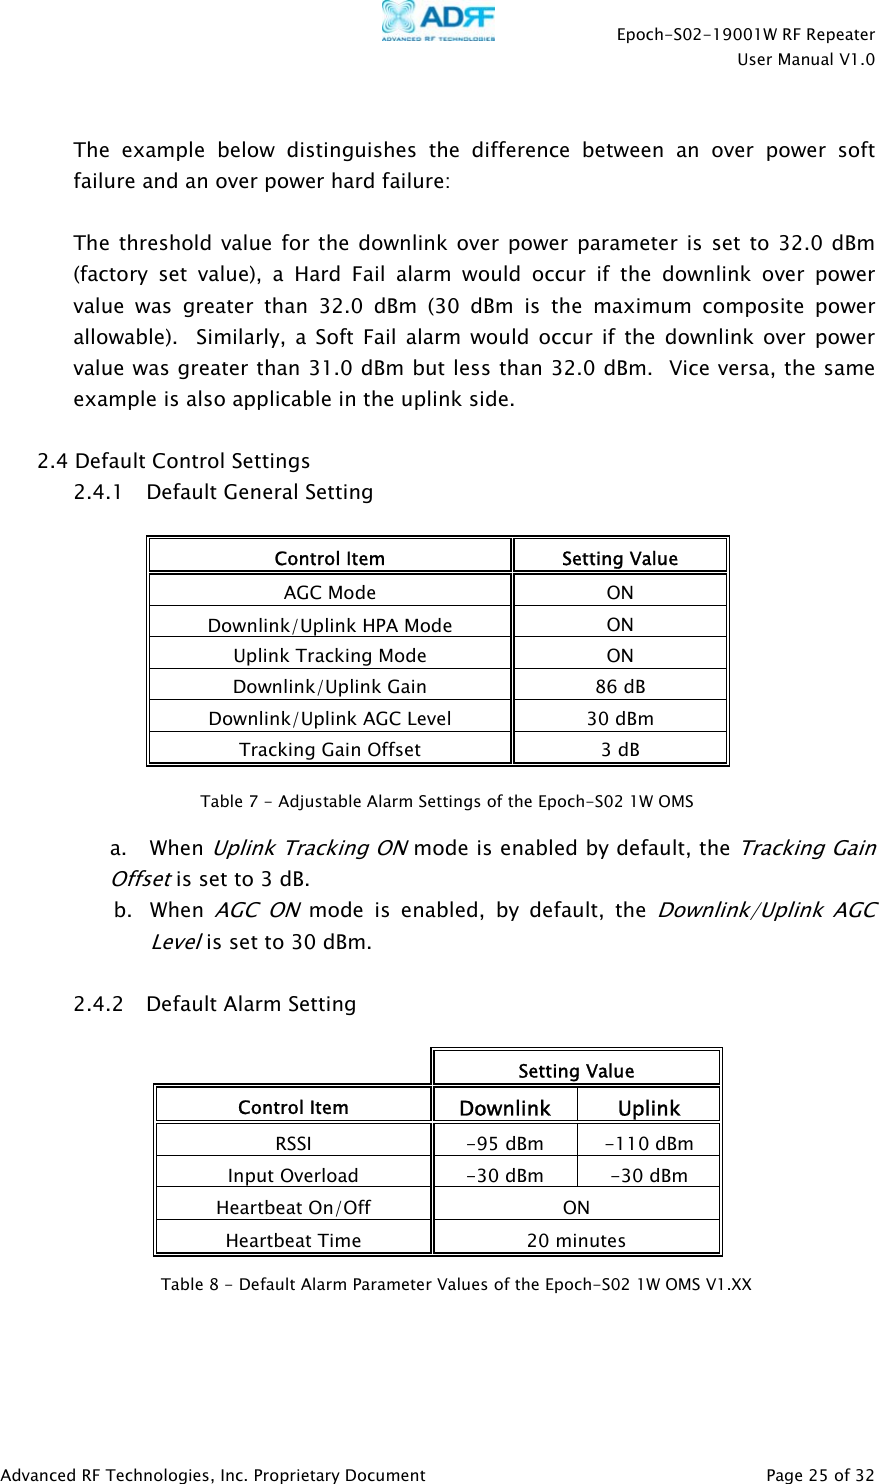    Epoch-S02-19001W RF Repeater  User Manual V1.0  Advanced RF Technologies, Inc. Proprietary Document   Page 25 of 32   The example below distinguishes the difference between an over power soft failure and an over power hard failure:  The threshold value for the downlink over power parameter is set to 32.0 dBm (factory set value), a Hard Fail alarm would occur if the downlink over power value was greater than 32.0 dBm (30 dBm is the maximum composite power allowable).  Similarly, a Soft Fail alarm would occur if the downlink over power value was greater than 31.0 dBm but less than 32.0 dBm.  Vice versa, the same example is also applicable in the uplink side.  2.4 Default Control Settings 2.4.1 Default General Setting  Control Item  Setting Value AGC Mode  ON Downlink/Uplink HPA Mode   ON Uplink Tracking Mode  ON Downlink/Uplink Gain  86 dB Downlink/Uplink AGC Level  30 dBm Tracking Gain Offset  3 dB   a.   When Uplink Tracking ON mode is enabled by default, the Tracking Gain Offset is set to 3 dB. b. When AGC ON mode is enabled, by default, the Downlink/Uplink AGC Level is set to 30 dBm.  2.4.2 Default Alarm Setting   Setting Value Control Item  Downlink Uplink RSSI   -95 dBm  -110 dBm Input Overload  -30 dBm  -30 dBm Heartbeat On/Off  ON Heartbeat Time  20 minutes     Table 8 - Default Alarm Parameter Values of the Epoch-S02 1W OMS V1.XX Table 7 - Adjustable Alarm Settings of the Epoch-S02 1W OMS 